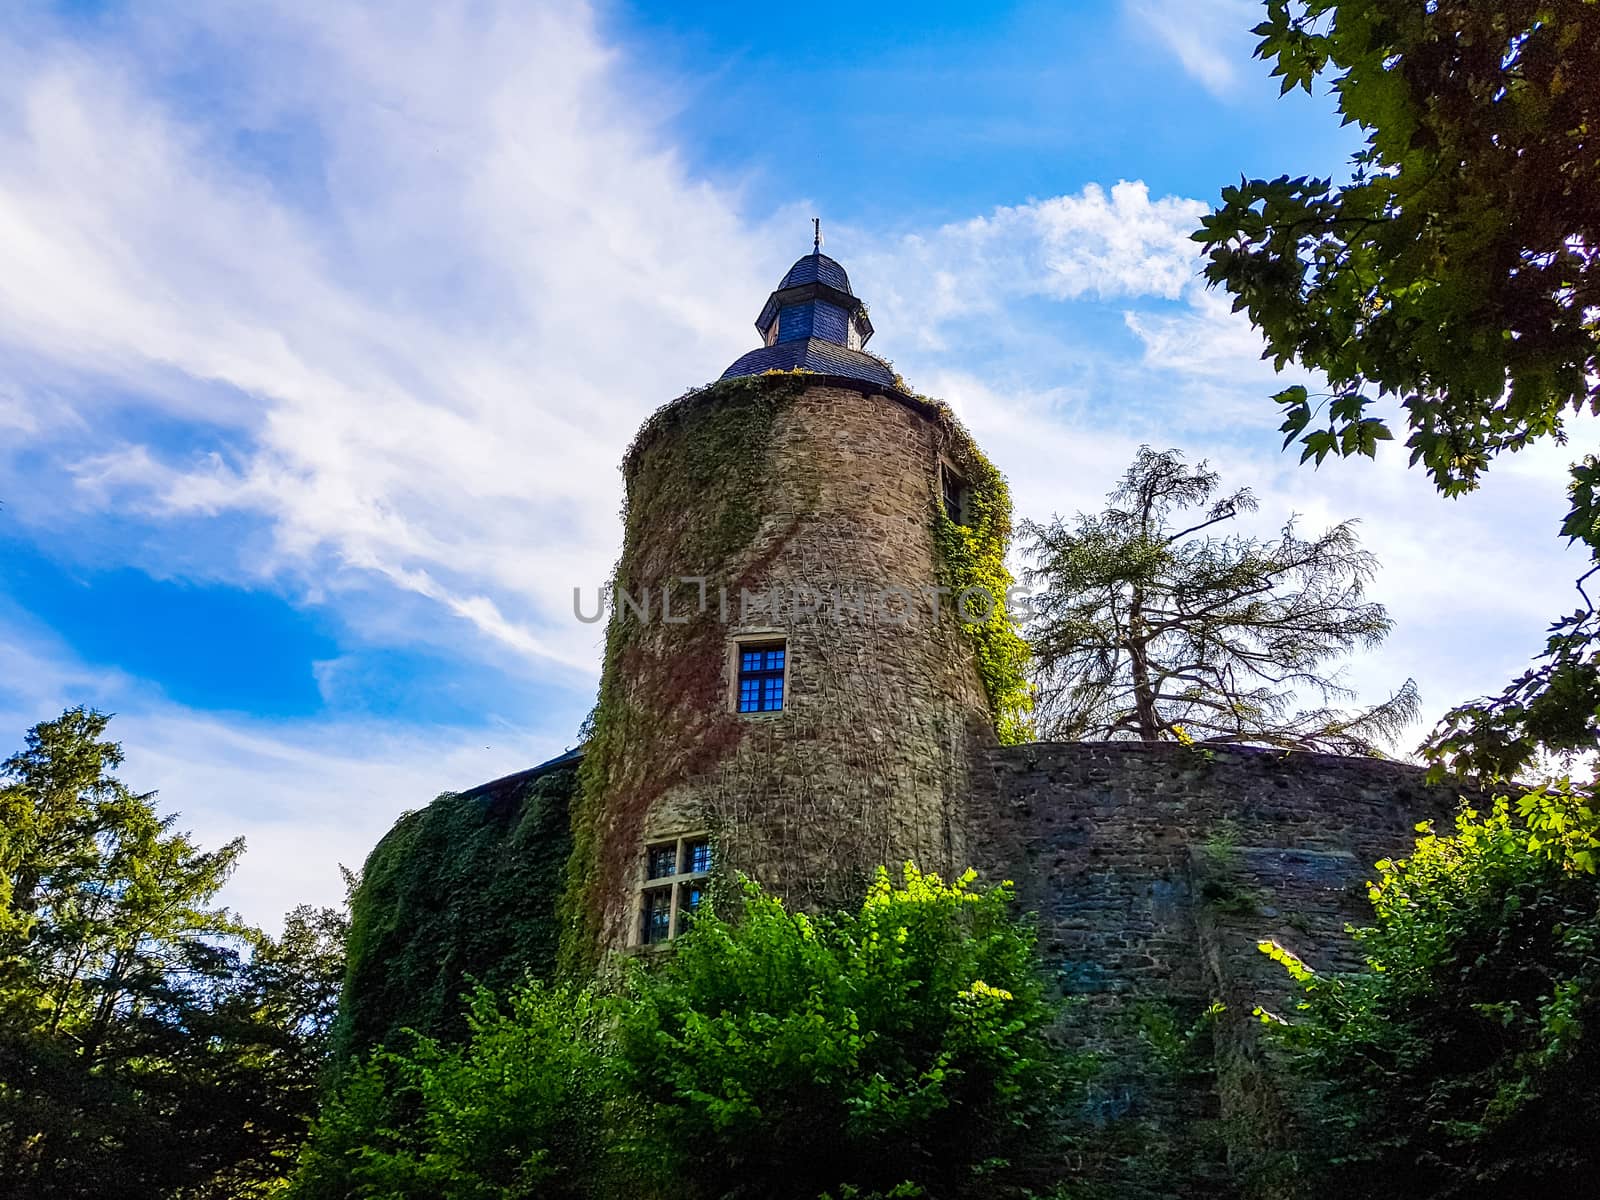 Castle tower of a medieval castle in front of blue sky  by JFsPic